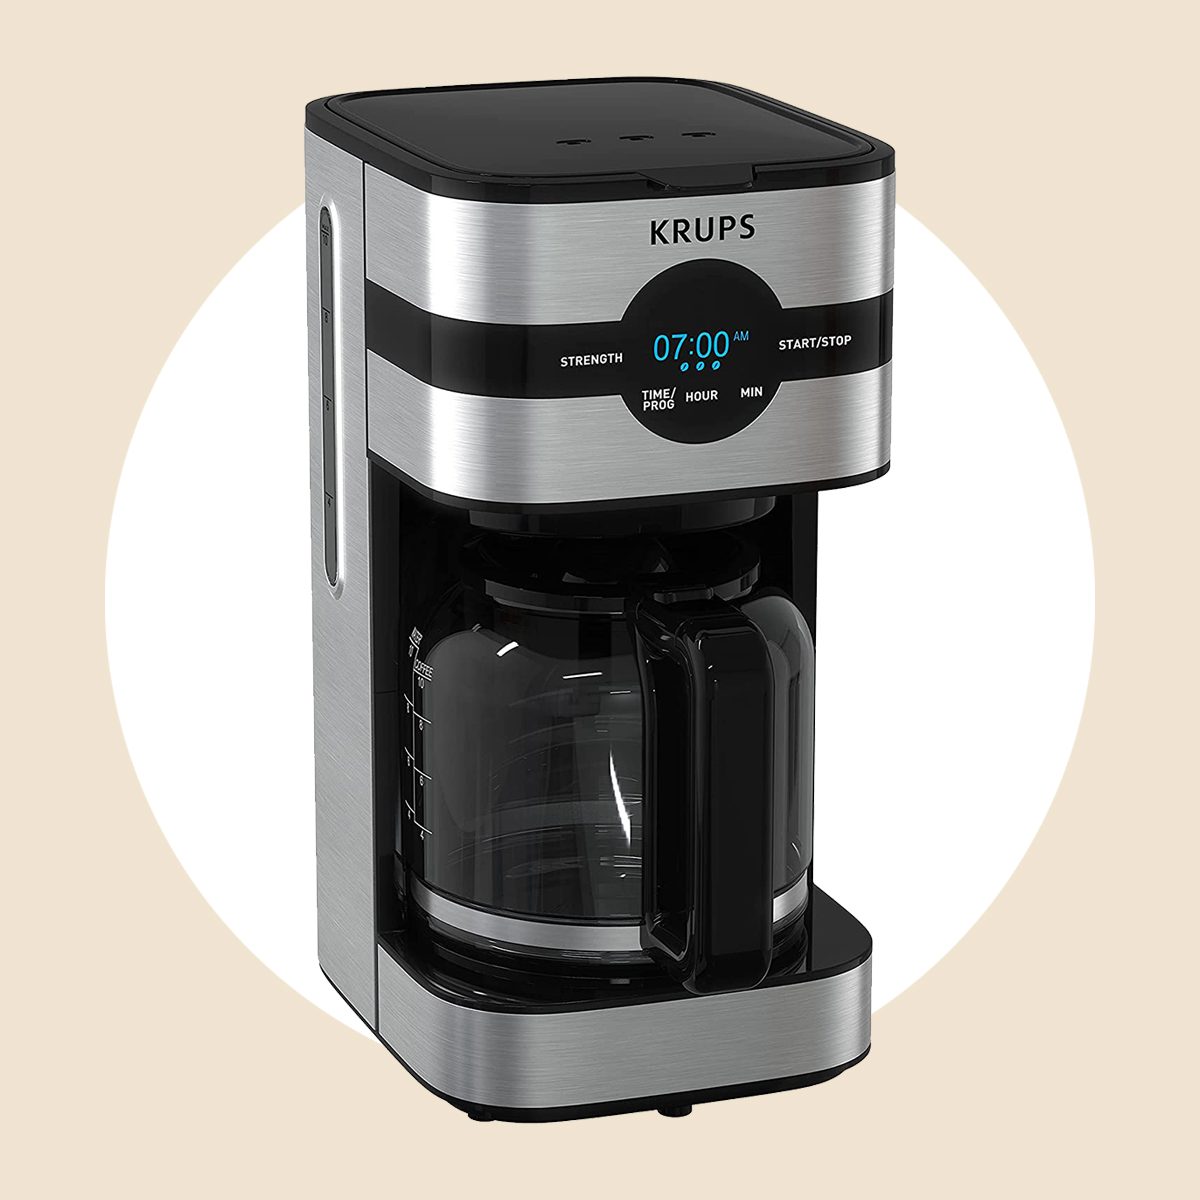 The Best Drip Coffee Maker Models According to a Coffee Pro